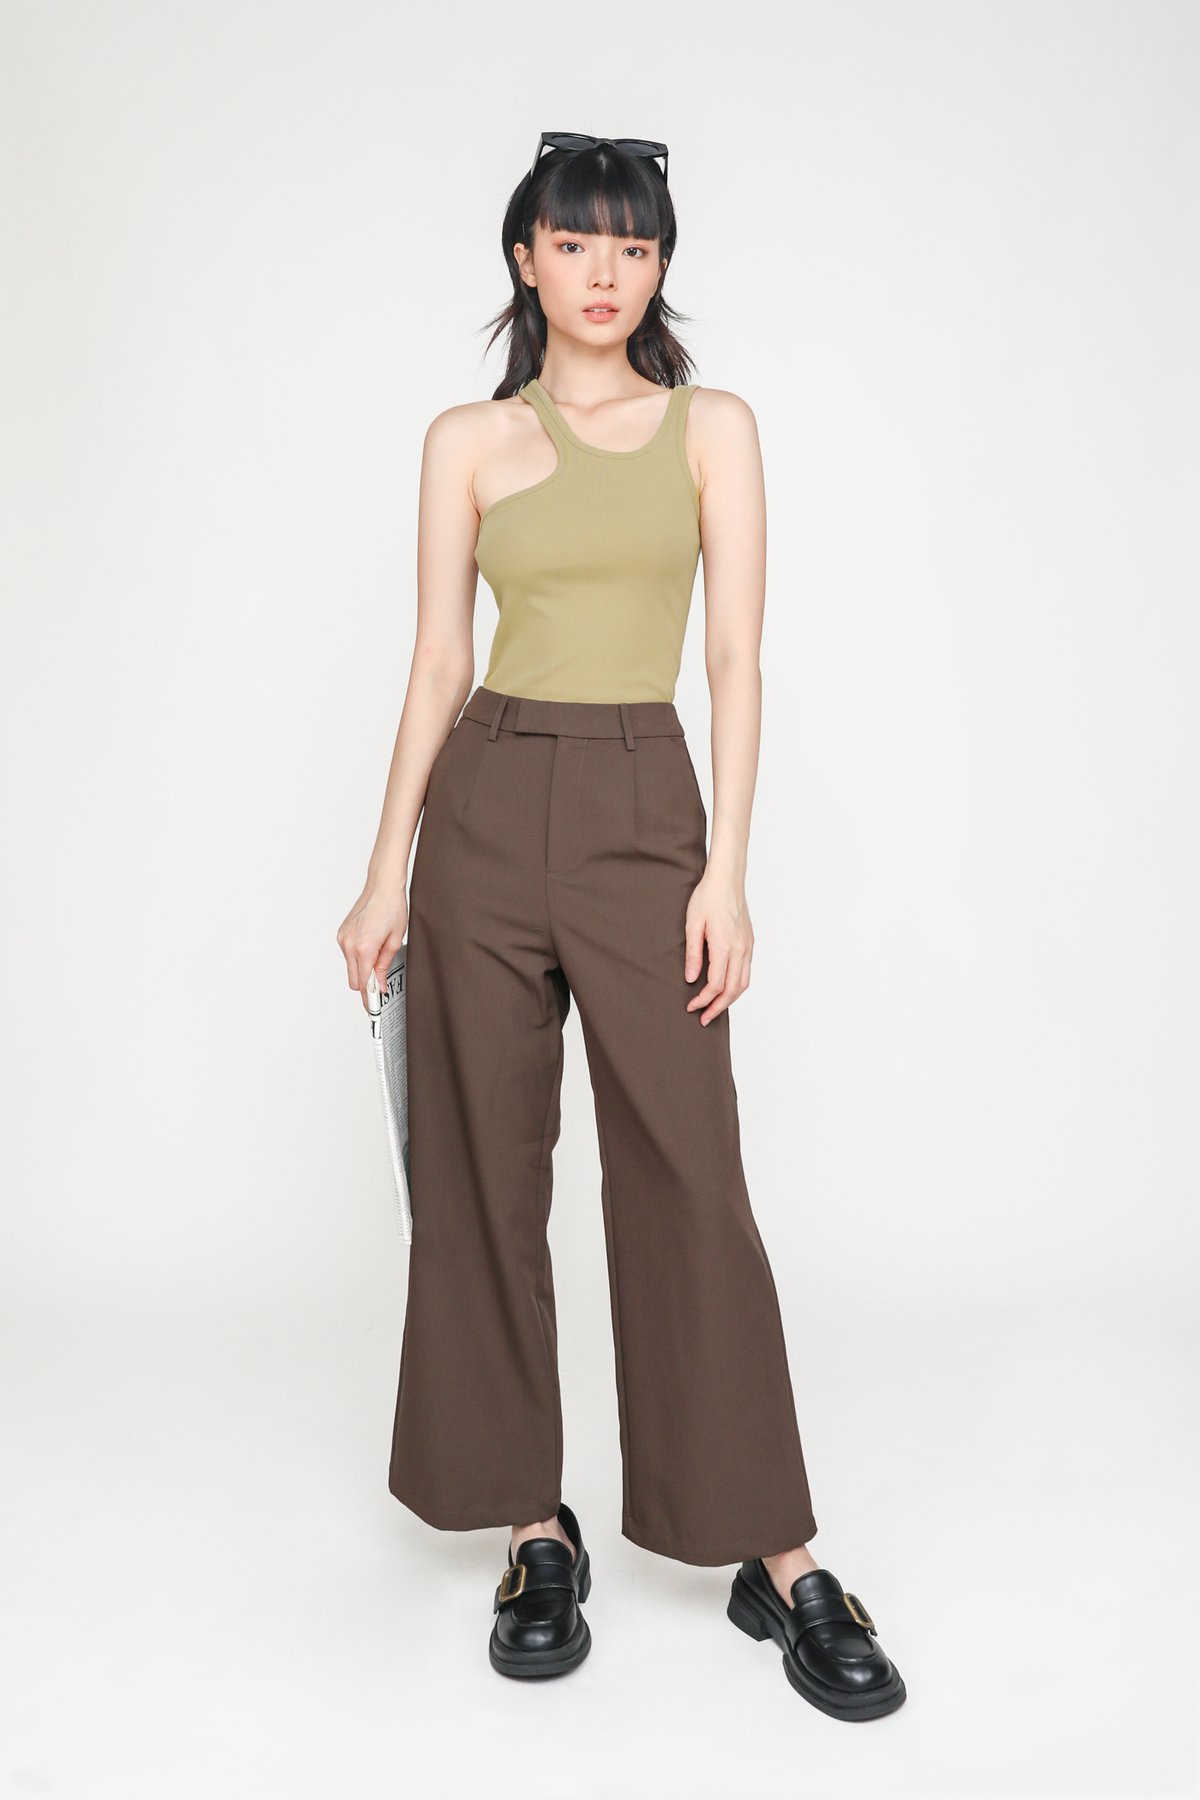 Vesper cami top and high waist flare pants set in rust